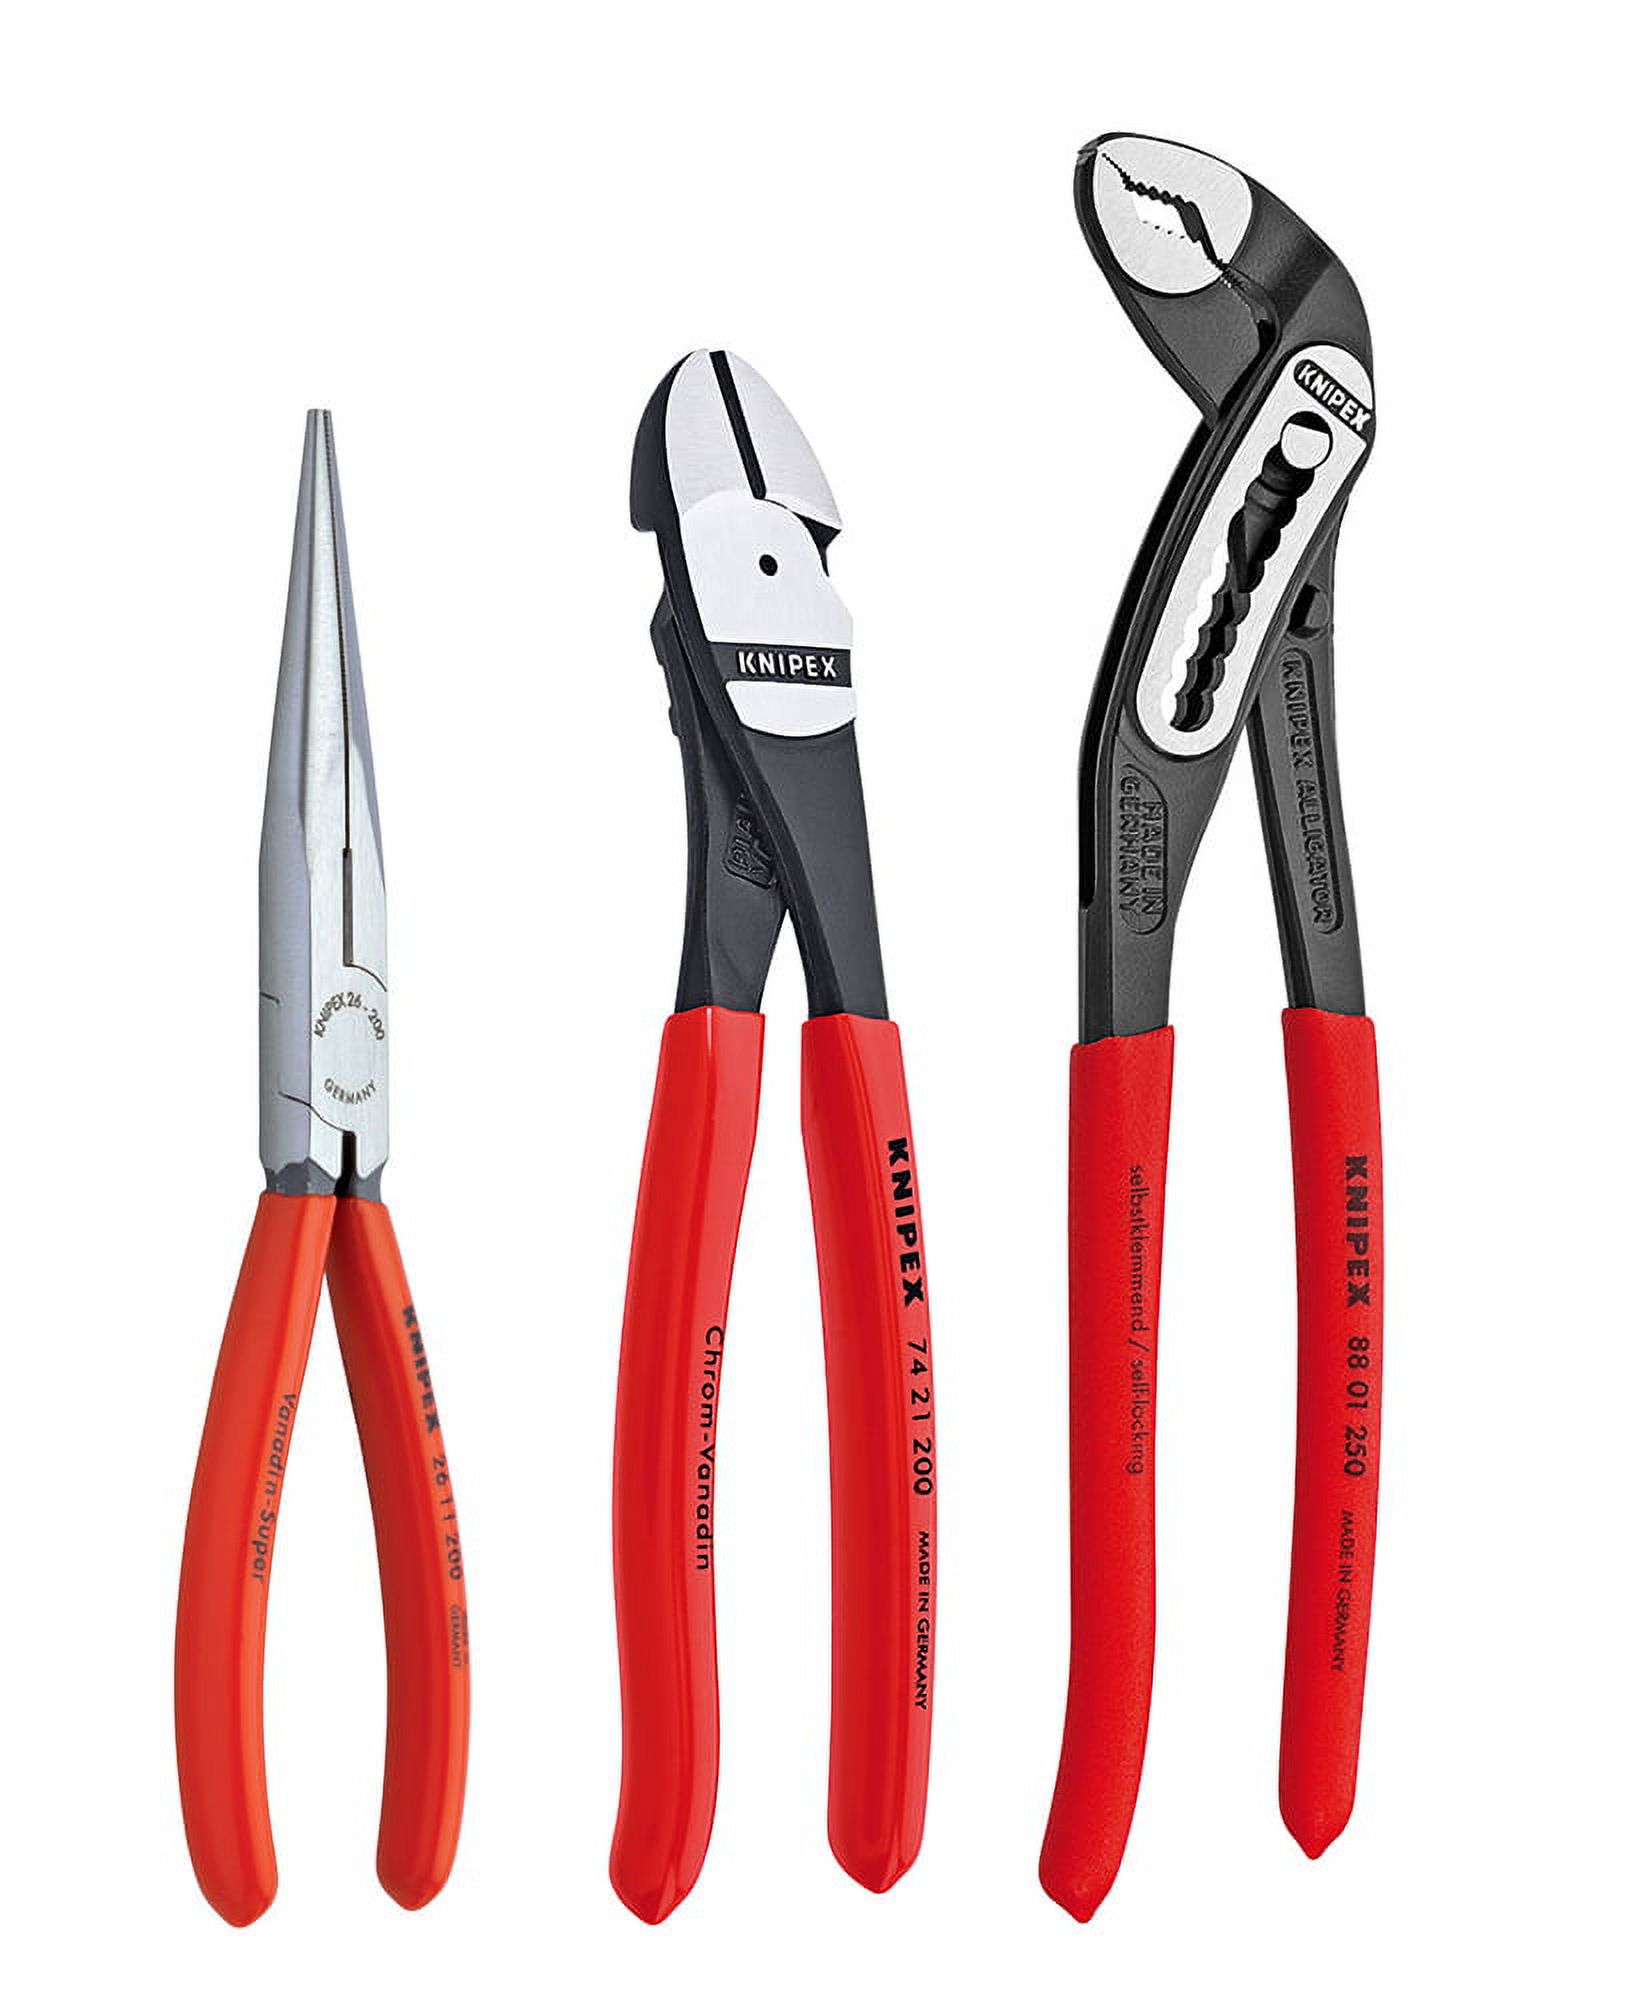 KNIPEX Tools 00 20 08 US1, Long Nose, Diagonal Cutter, and Alligator Pliers Tool Set, 3-Piece - image 2 of 5